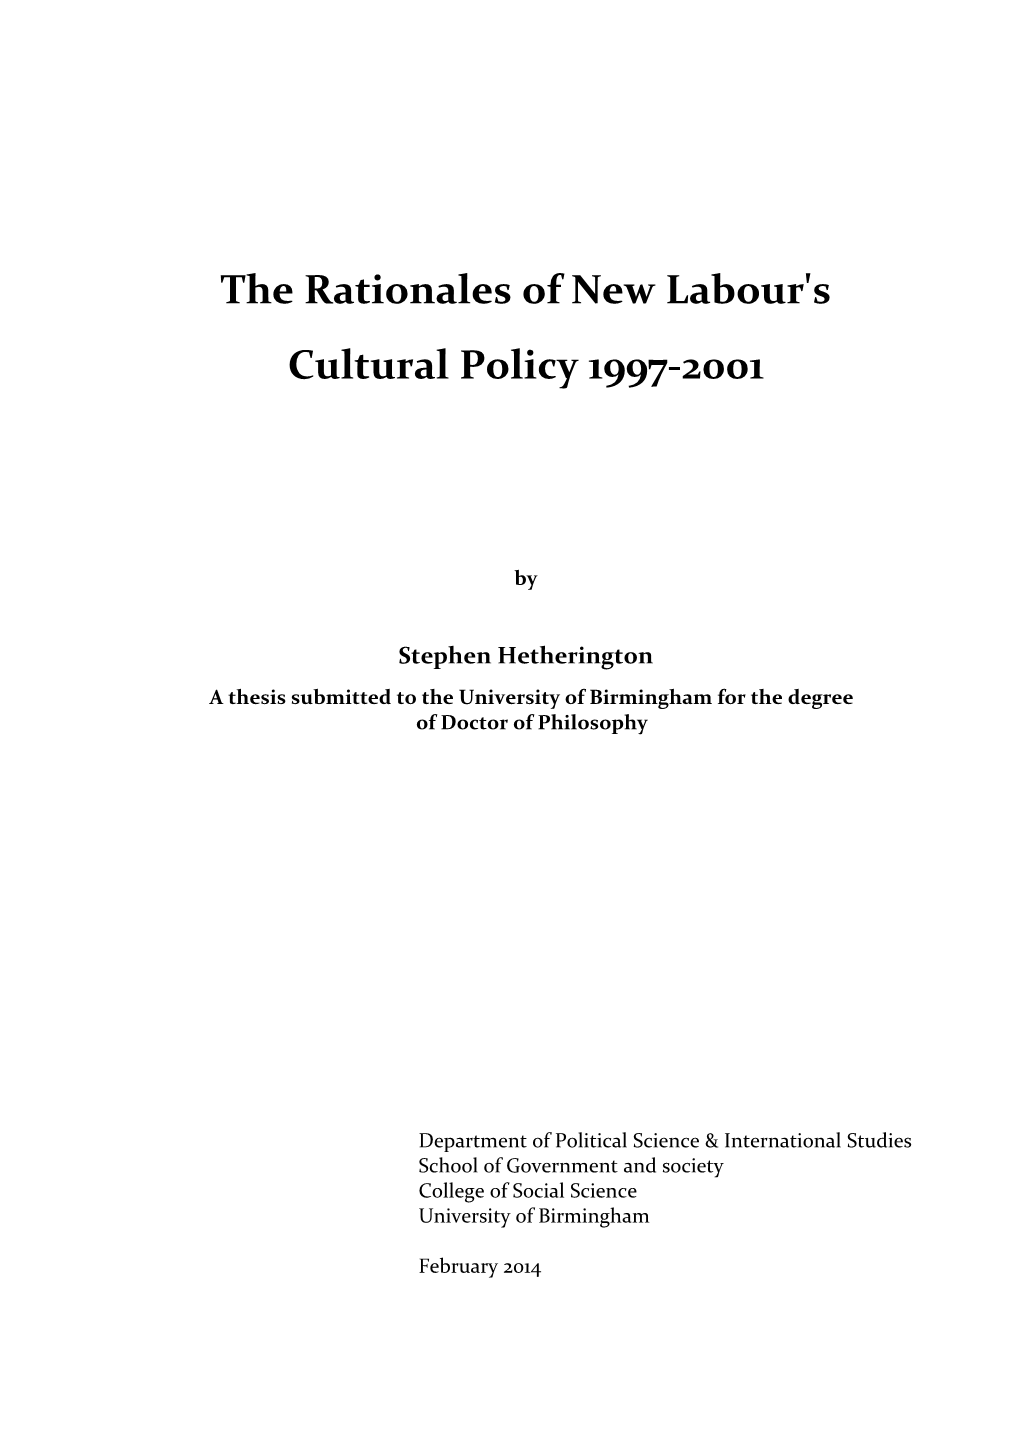 The Rationales of New Labour's Cultural Policy 1997-2001